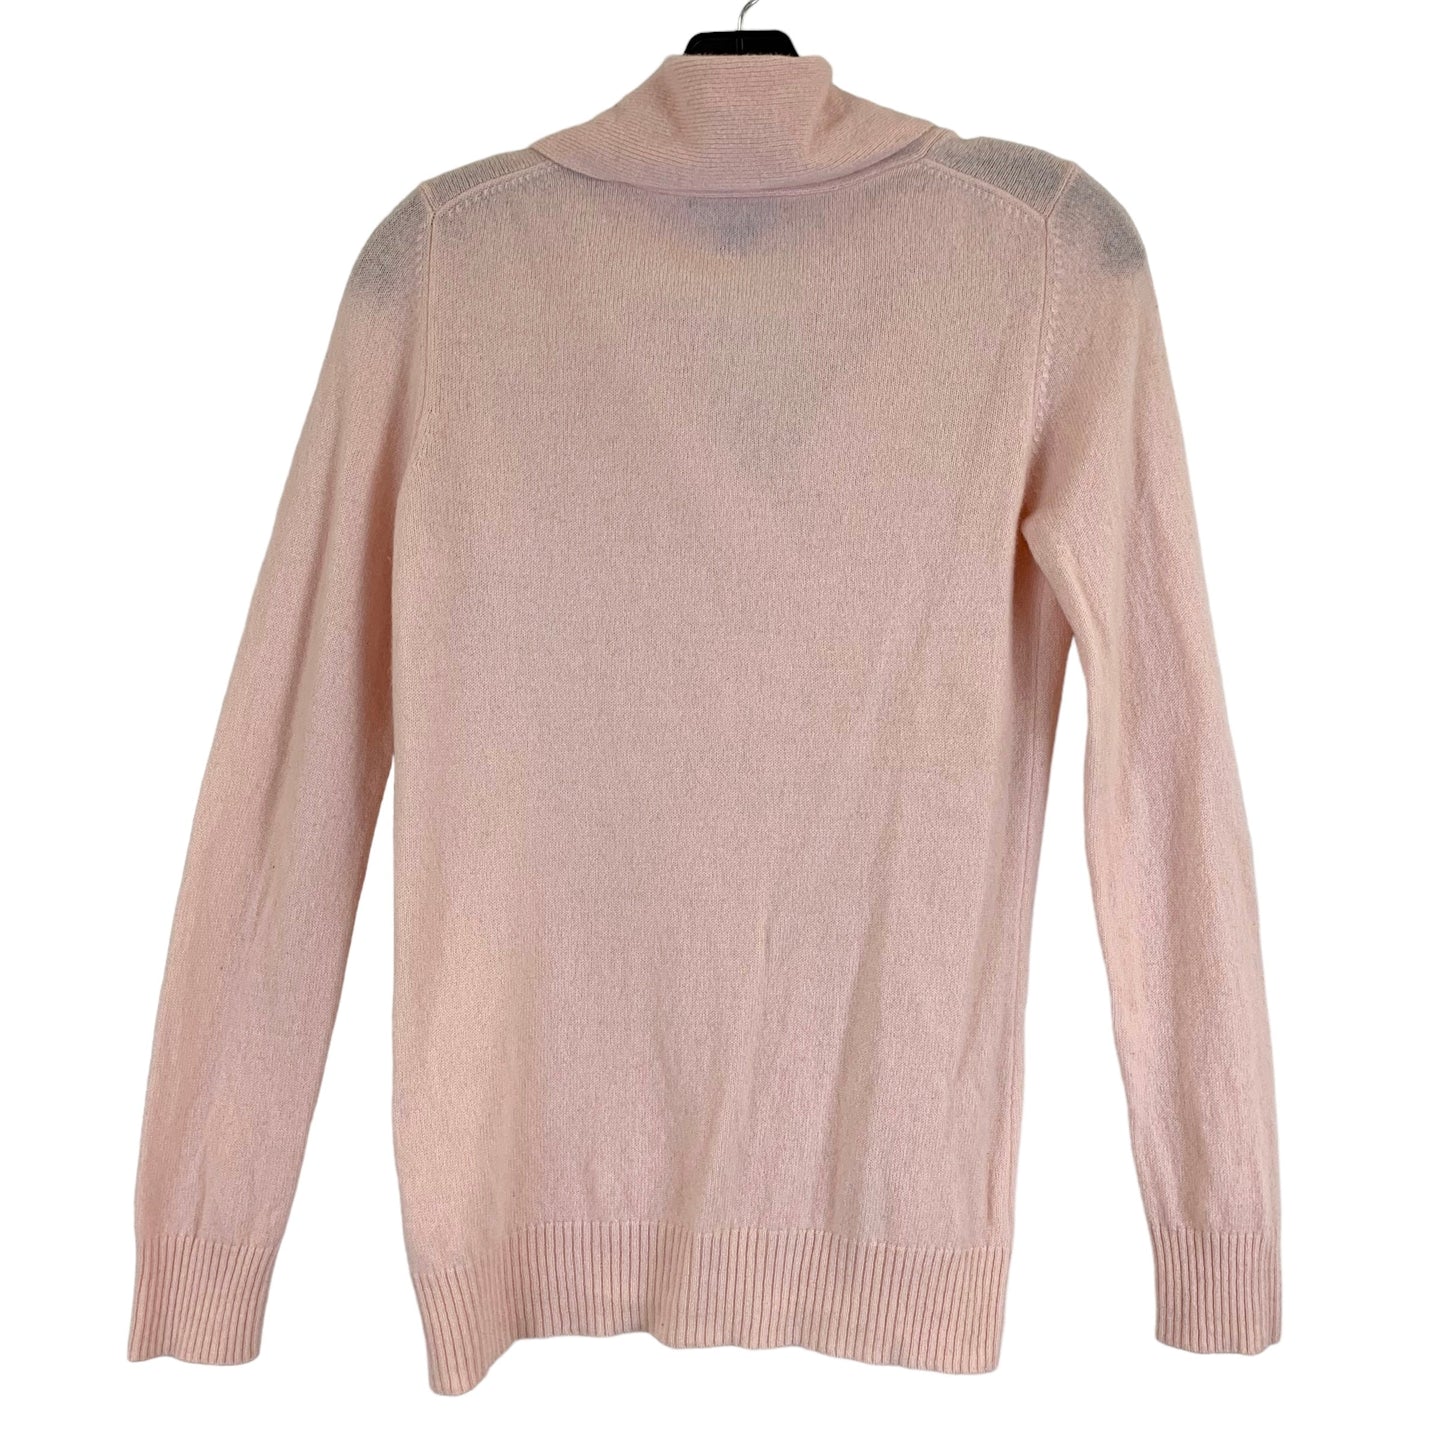 Sweater Cashmere By Charter Club  Size: Xs